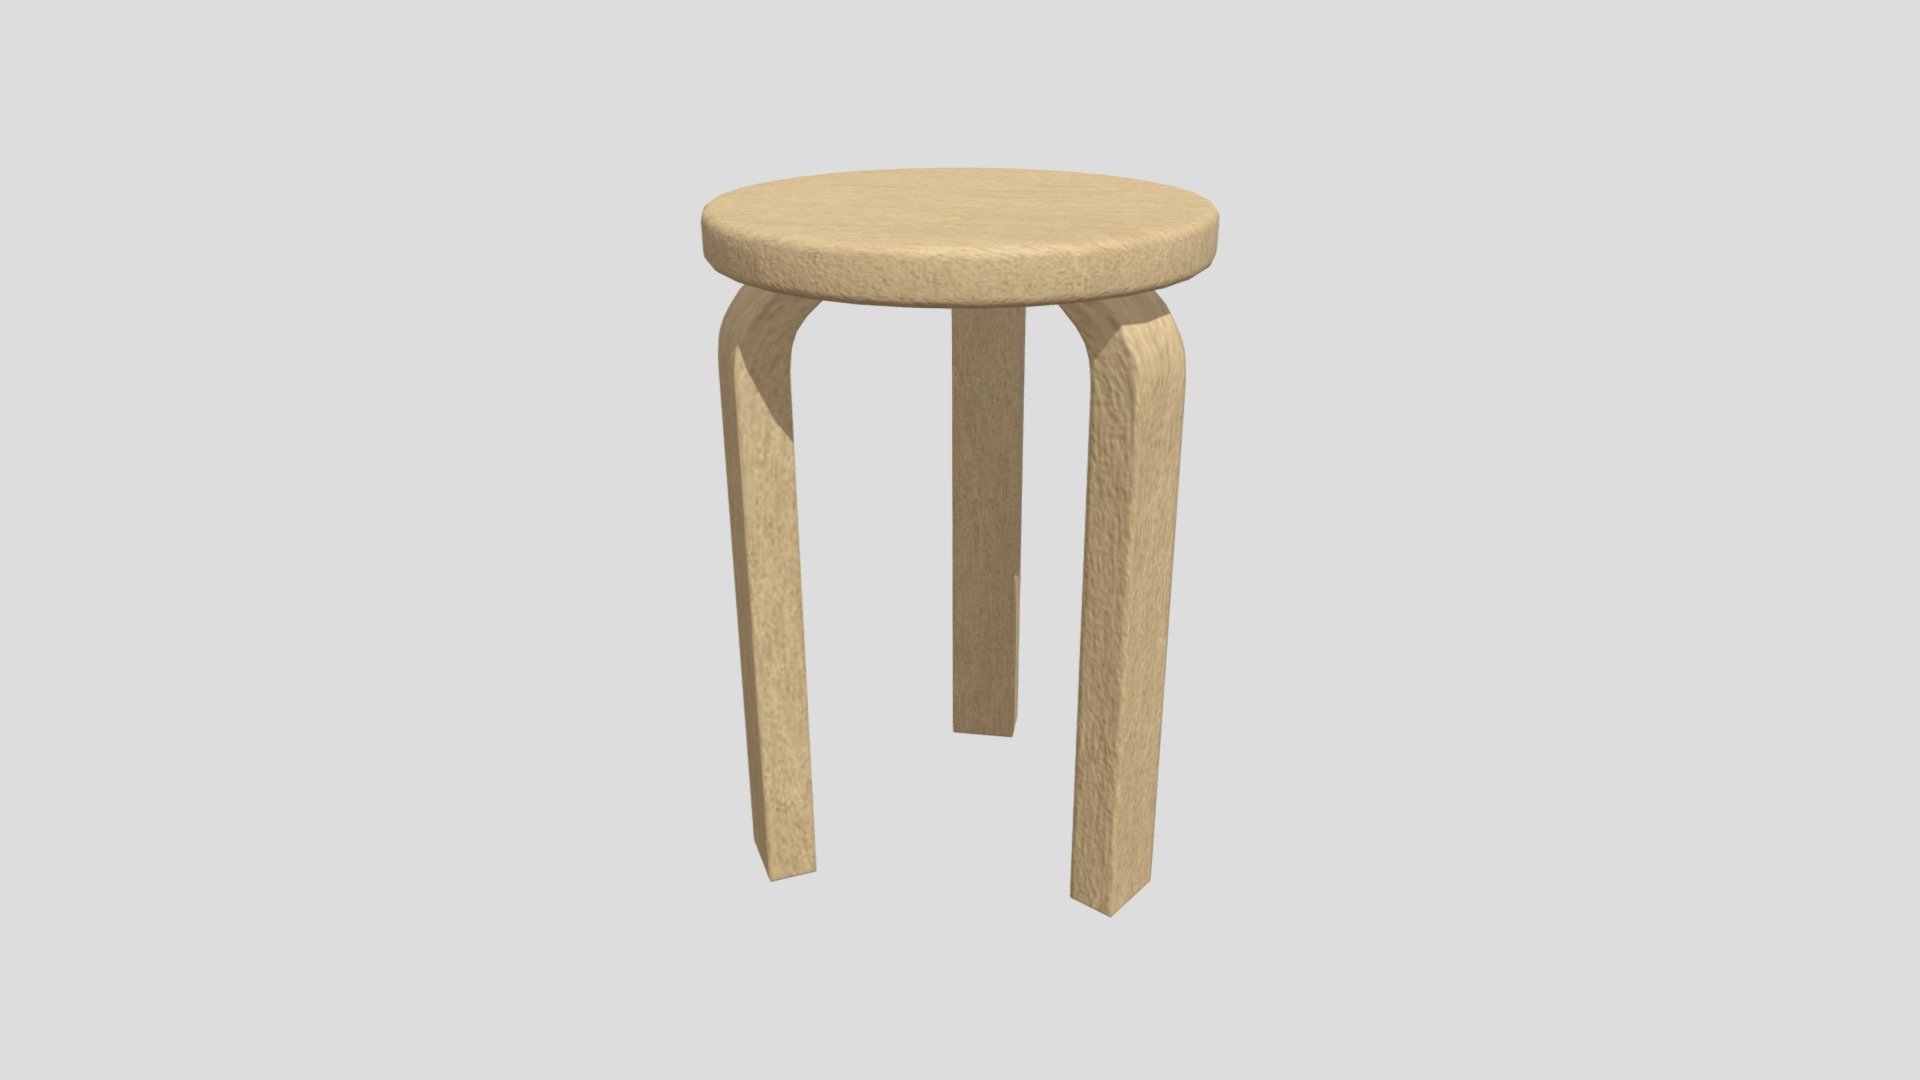 Subdivision Level: 0

Can subdivide upon request.

Non-Mirrored.

Textures: 2048 x 2048 and 1024 x 1024, Two colors on texture: Wooden Yellow and Dark Grey.

Materials: 2 - Stool, Screw.

Formats: .stl .obj .fbx .dae .x3d

Origin located on bottom-center 

Polygons: 4032

Vertices: 2090

I hope you enjoy the model! - Stool 3 Legs - Buy Royalty Free 3D model by Ed+ (@EDplus) 3d model